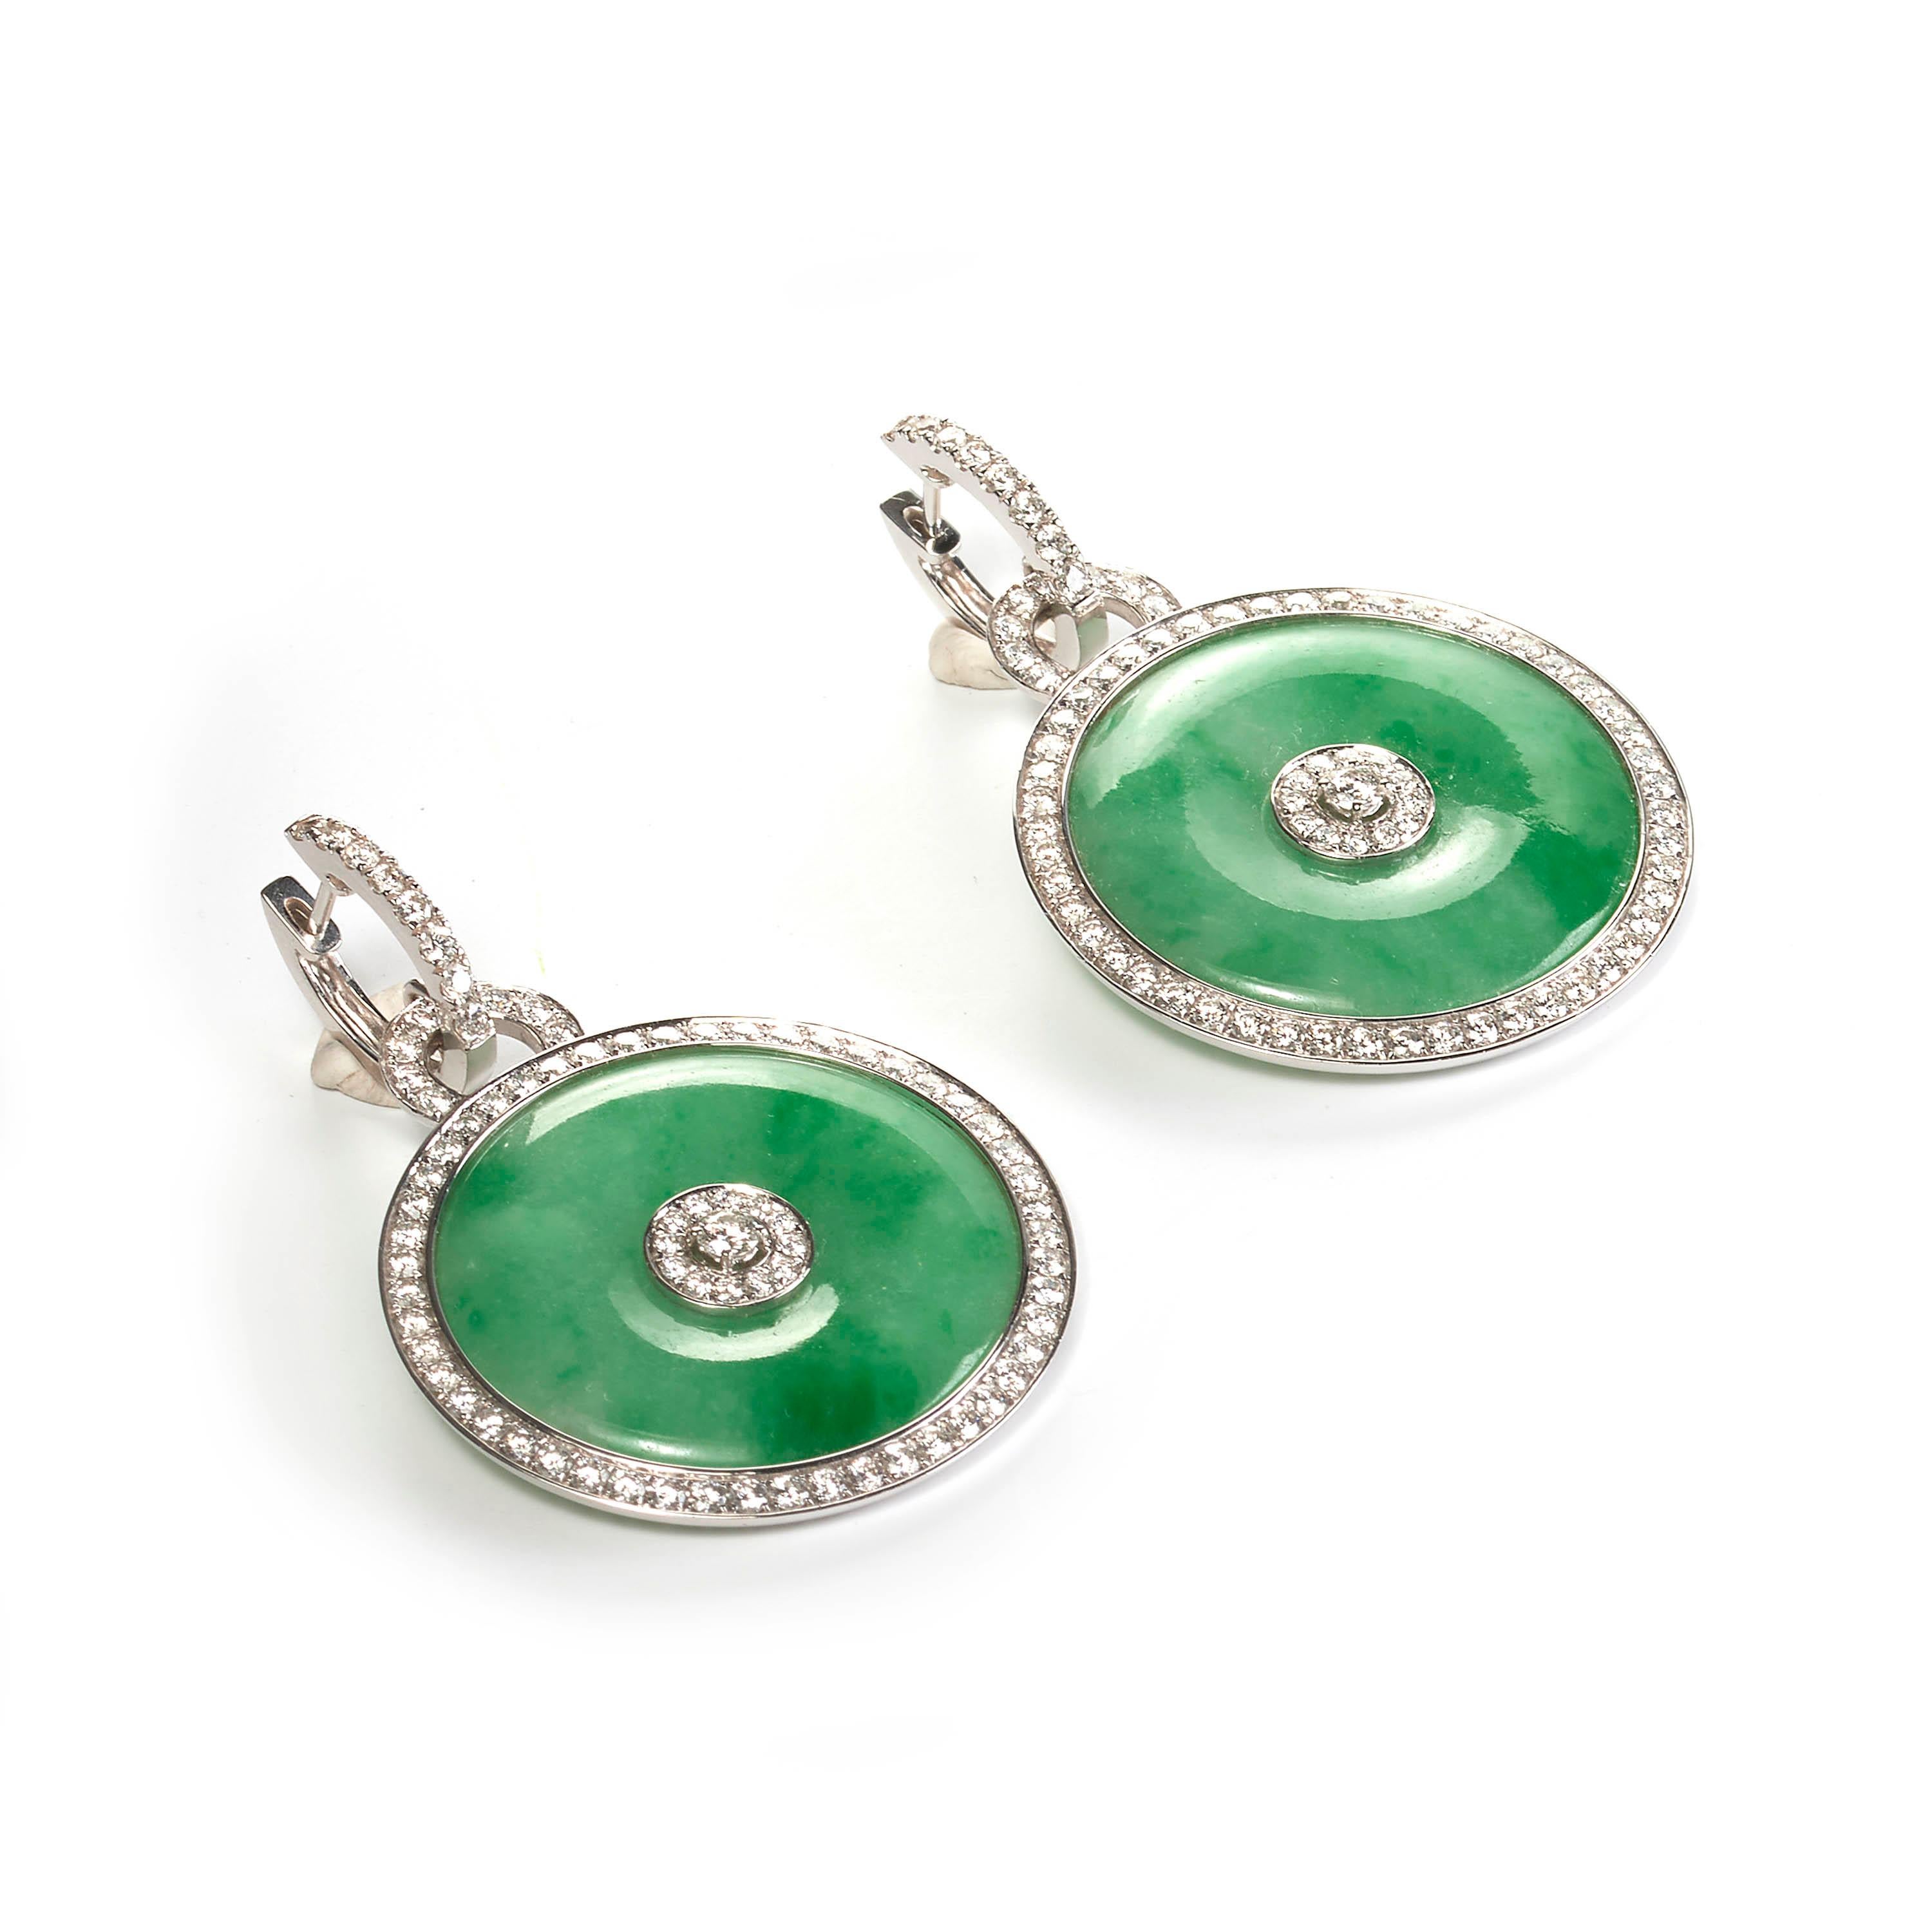 A pair of modern jade and diamond drop earrings, comprised of circular discs of polished green jade, with a round cluster of brilliant-cut diamonds in the centre, further surrounded by a border of diamonds, and diamond-set hoop fittings, all mounted